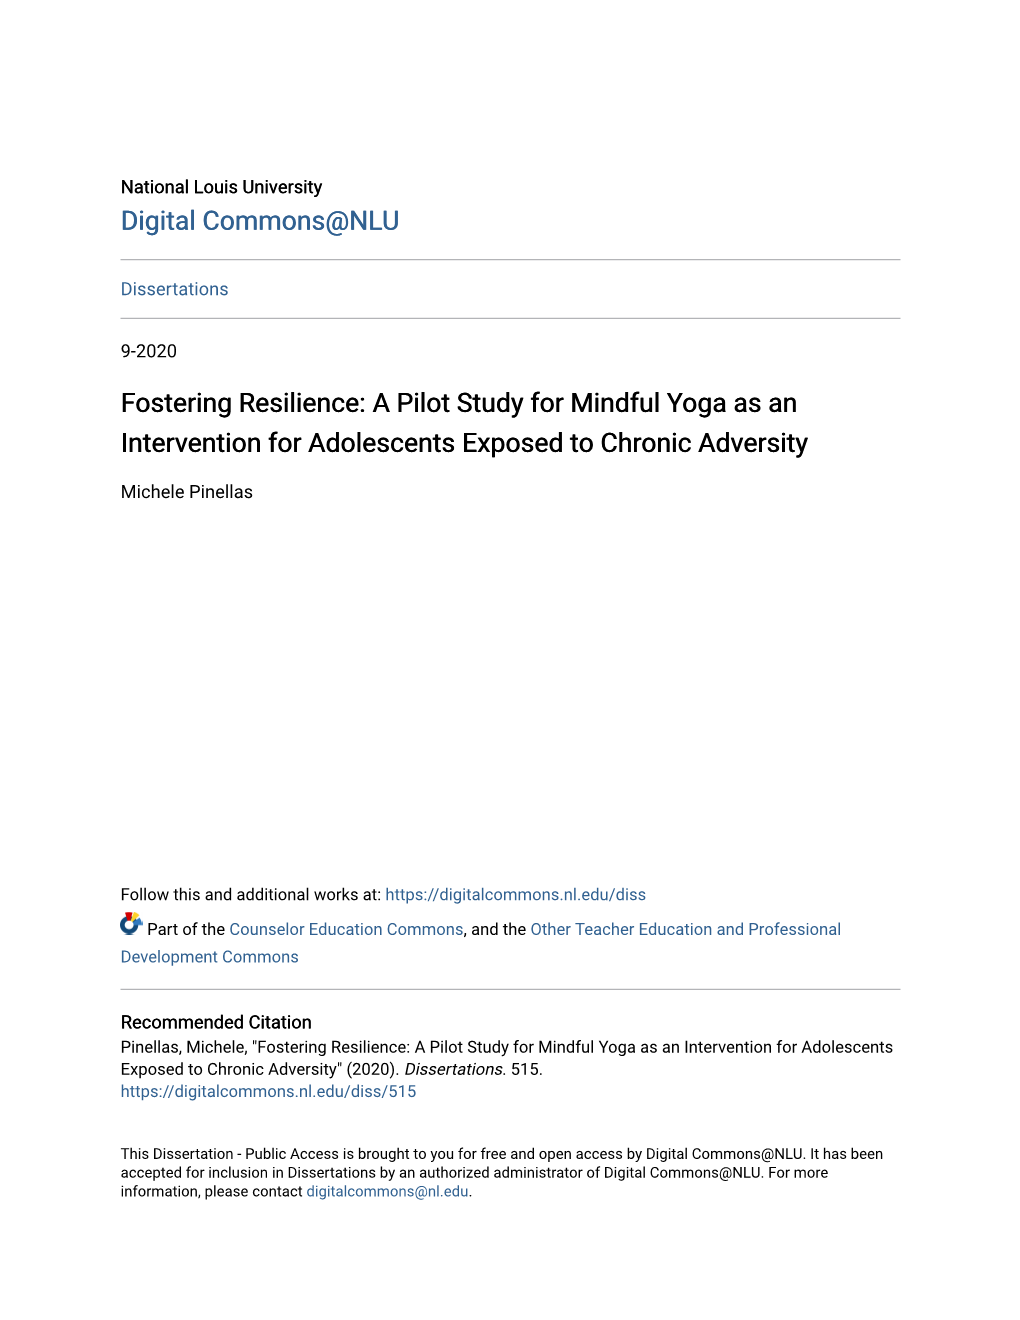 Fostering Resilience: a Pilot Study for Mindful Yoga As an Intervention for Adolescents Exposed to Chronic Adversity